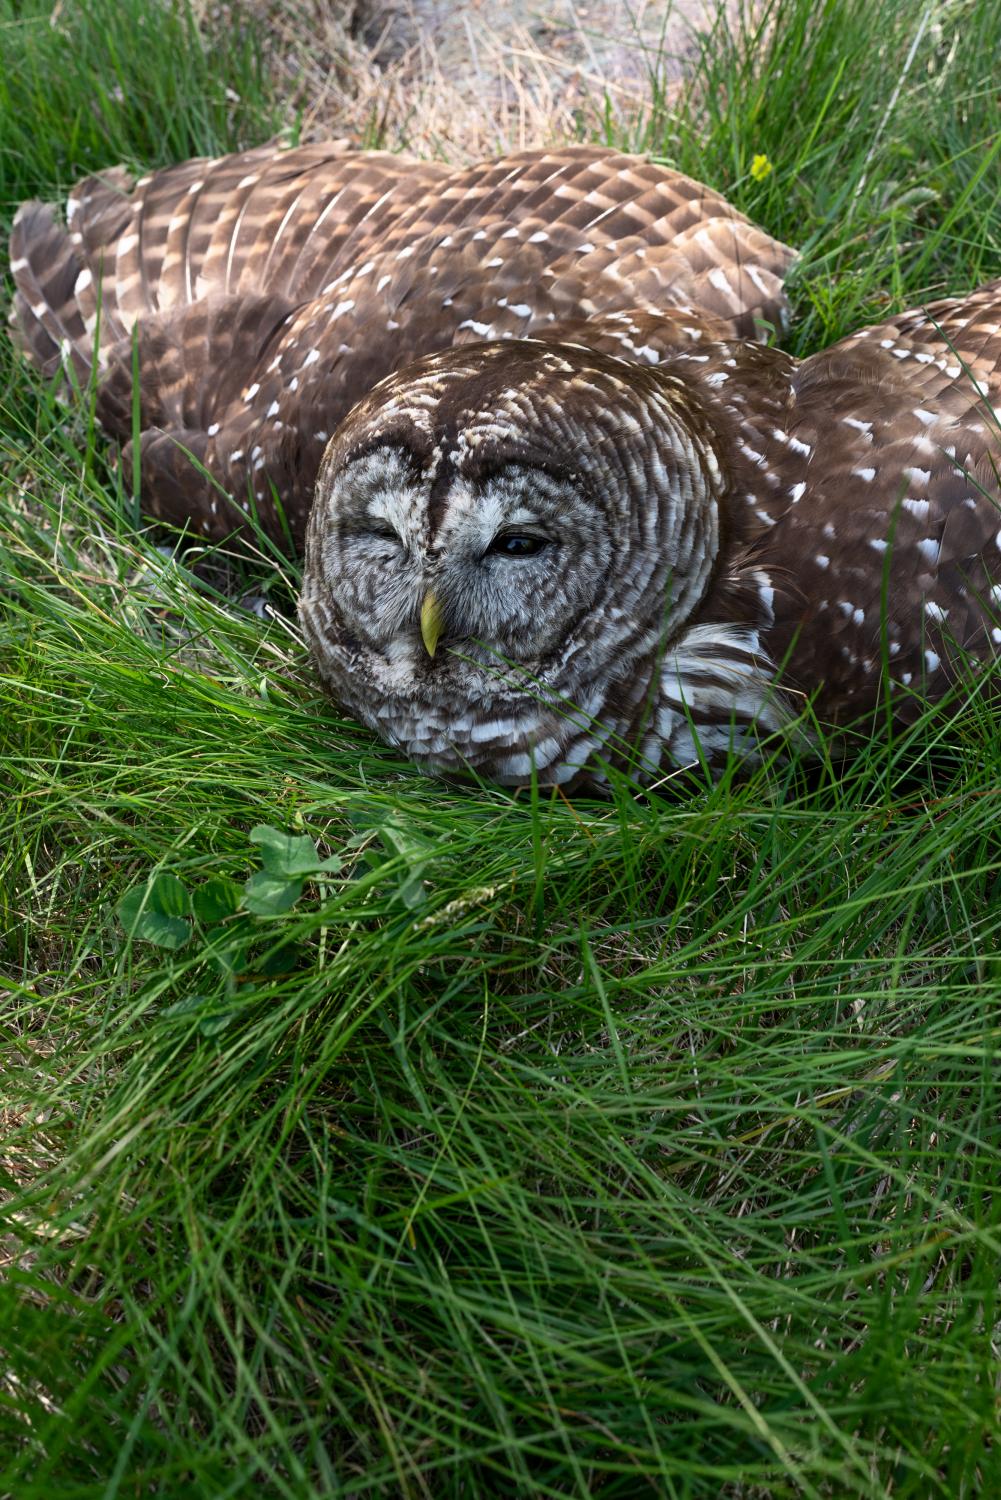 It Takes a Village - A barred owl poisoned from lawn chemicals.